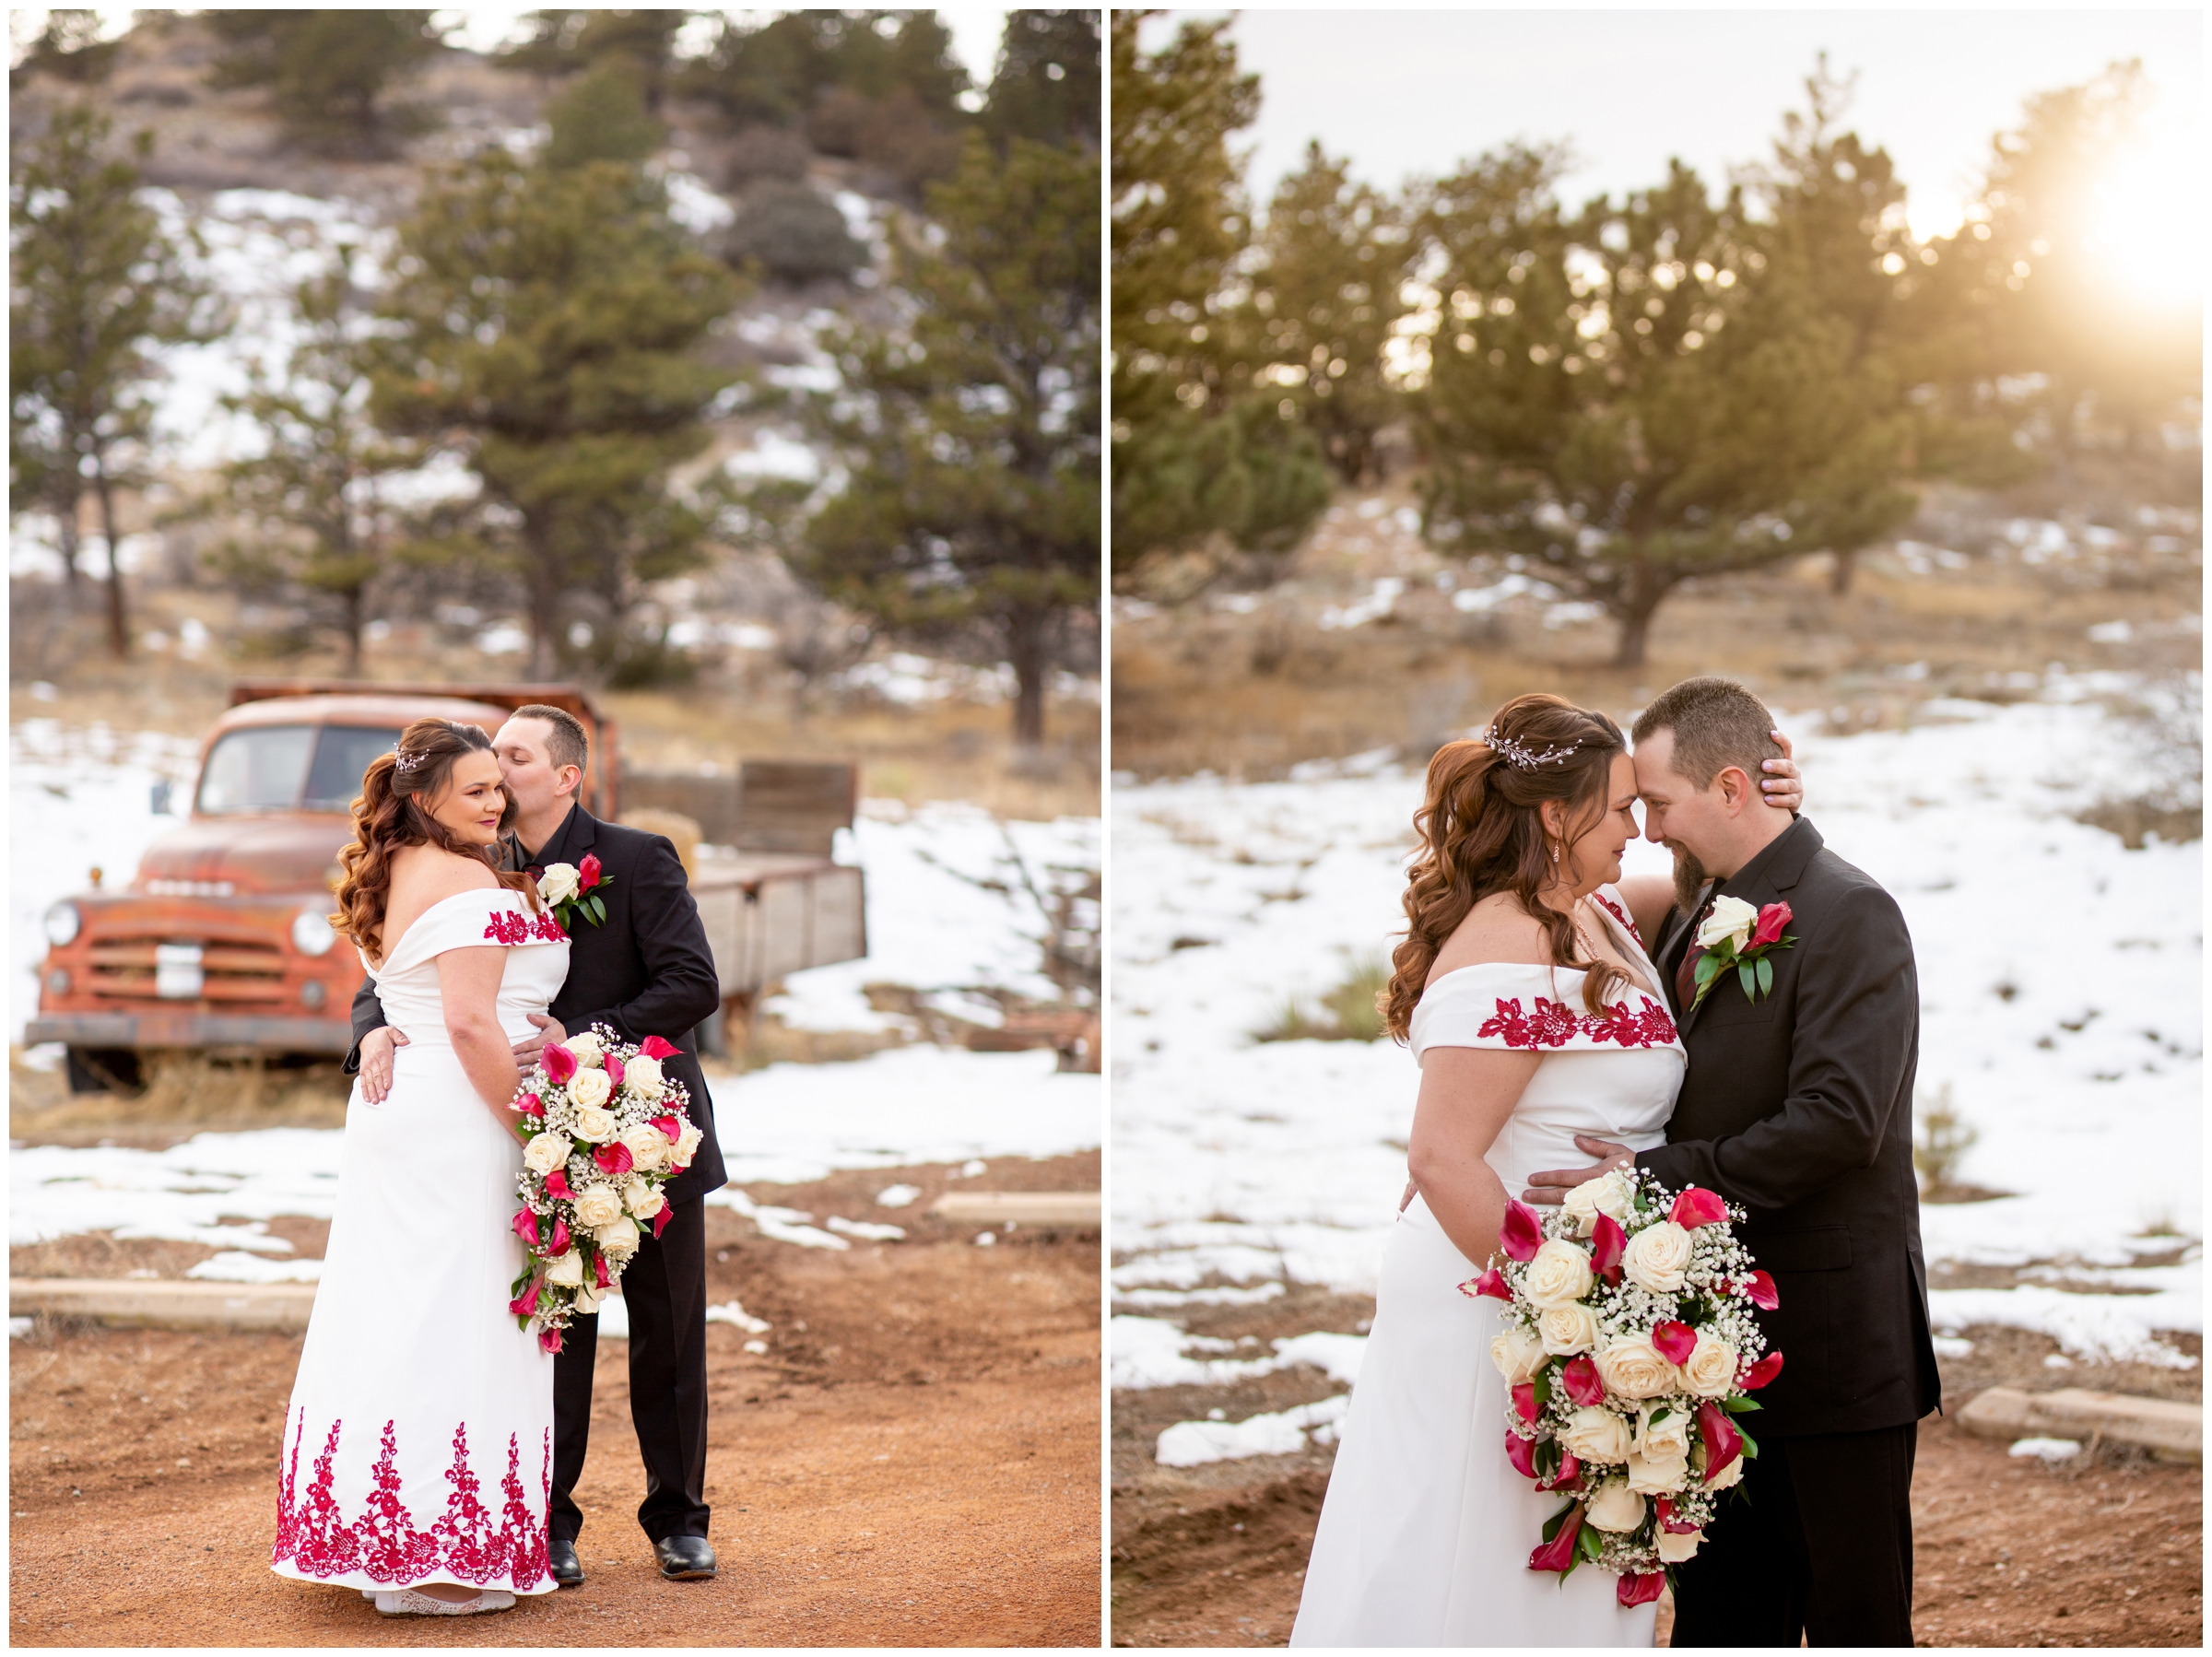 couple cuddling during sunny and snowy wedding pictures at Lionscrest Manor